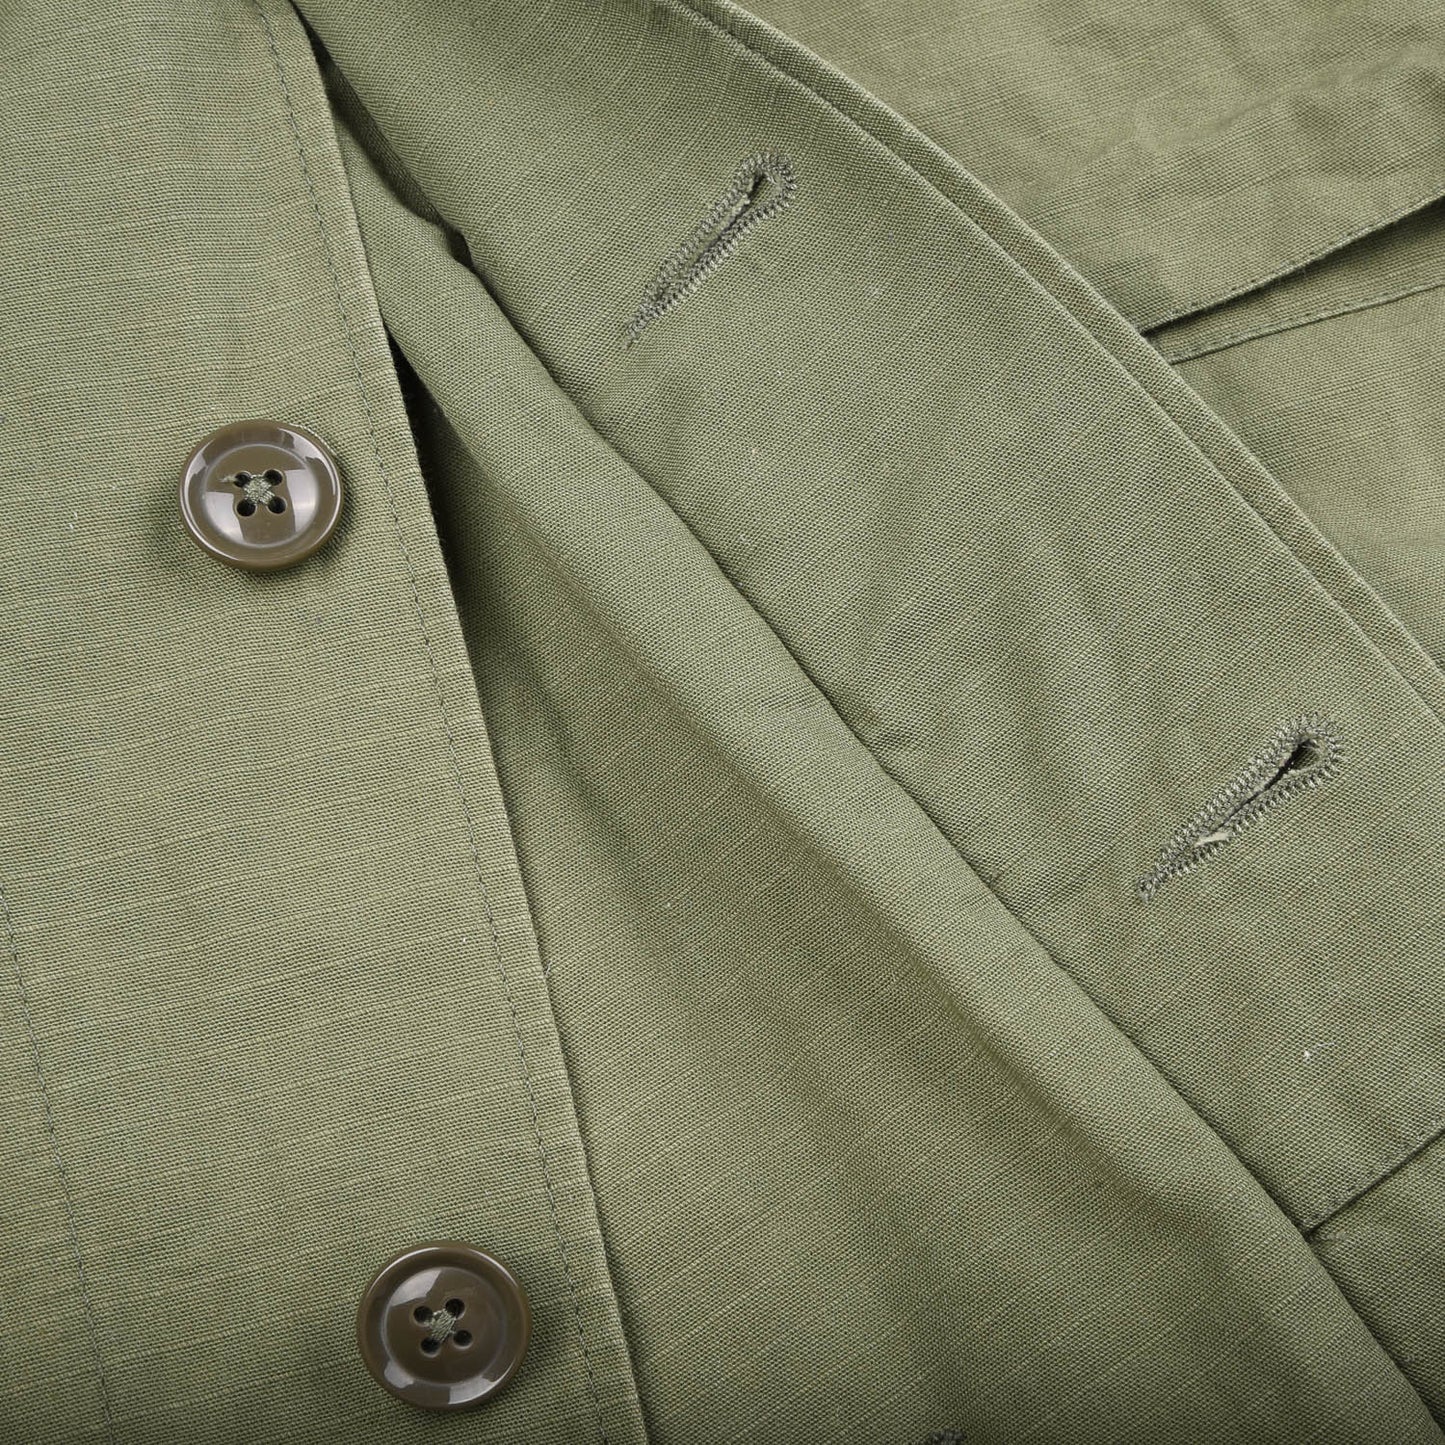 USED ENGINEERED GARMENTS MILITARY FIELD JACKET -  FADED GREEN RIPSTOP